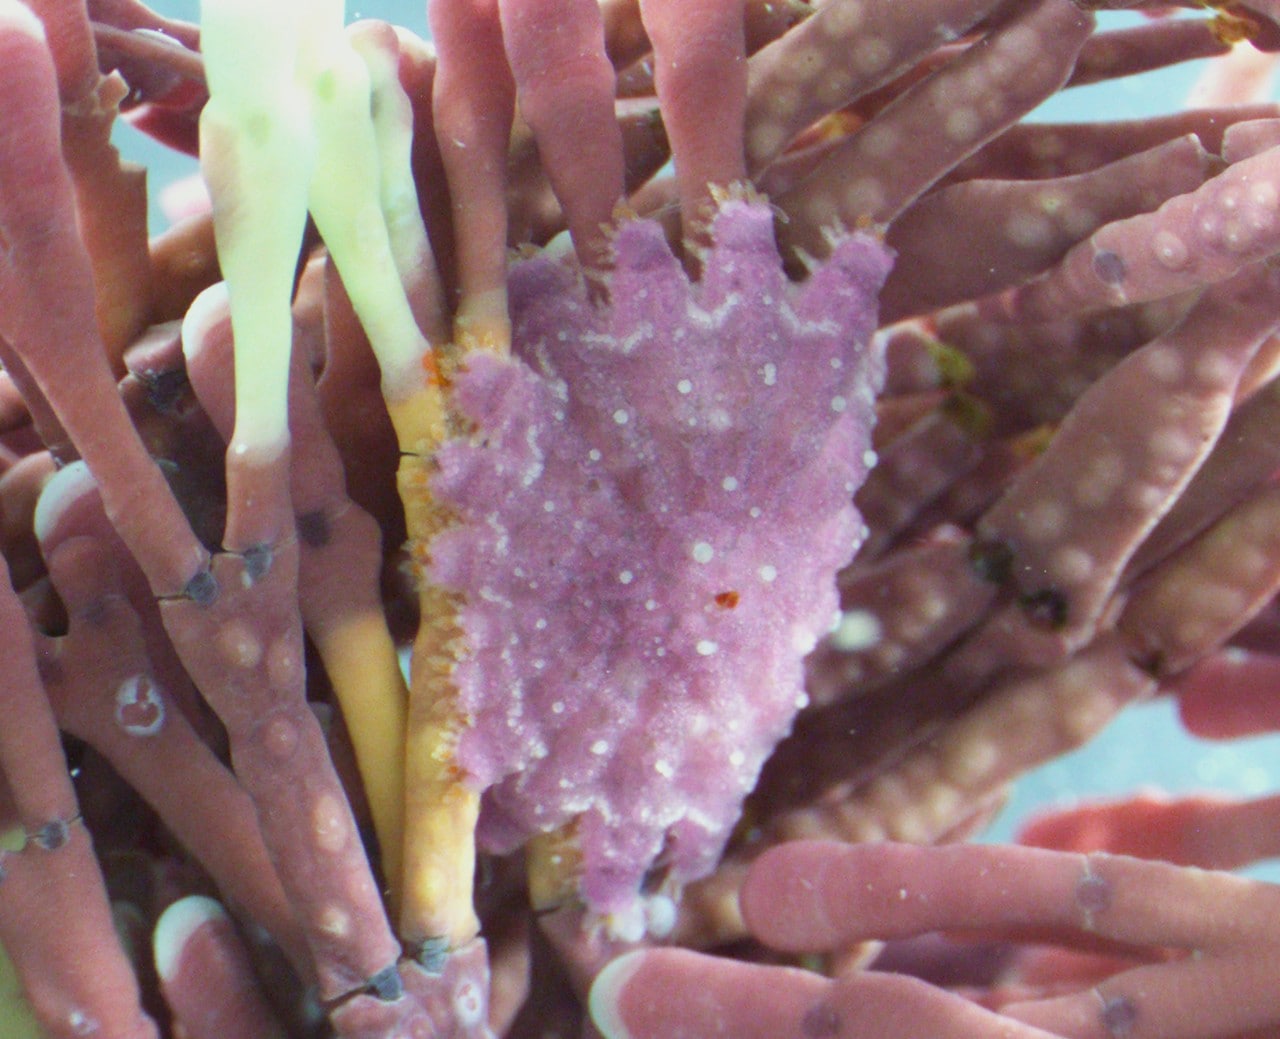 A juvenile crown-of-thorns starfish on Amphiroa – a type of pink algae. 